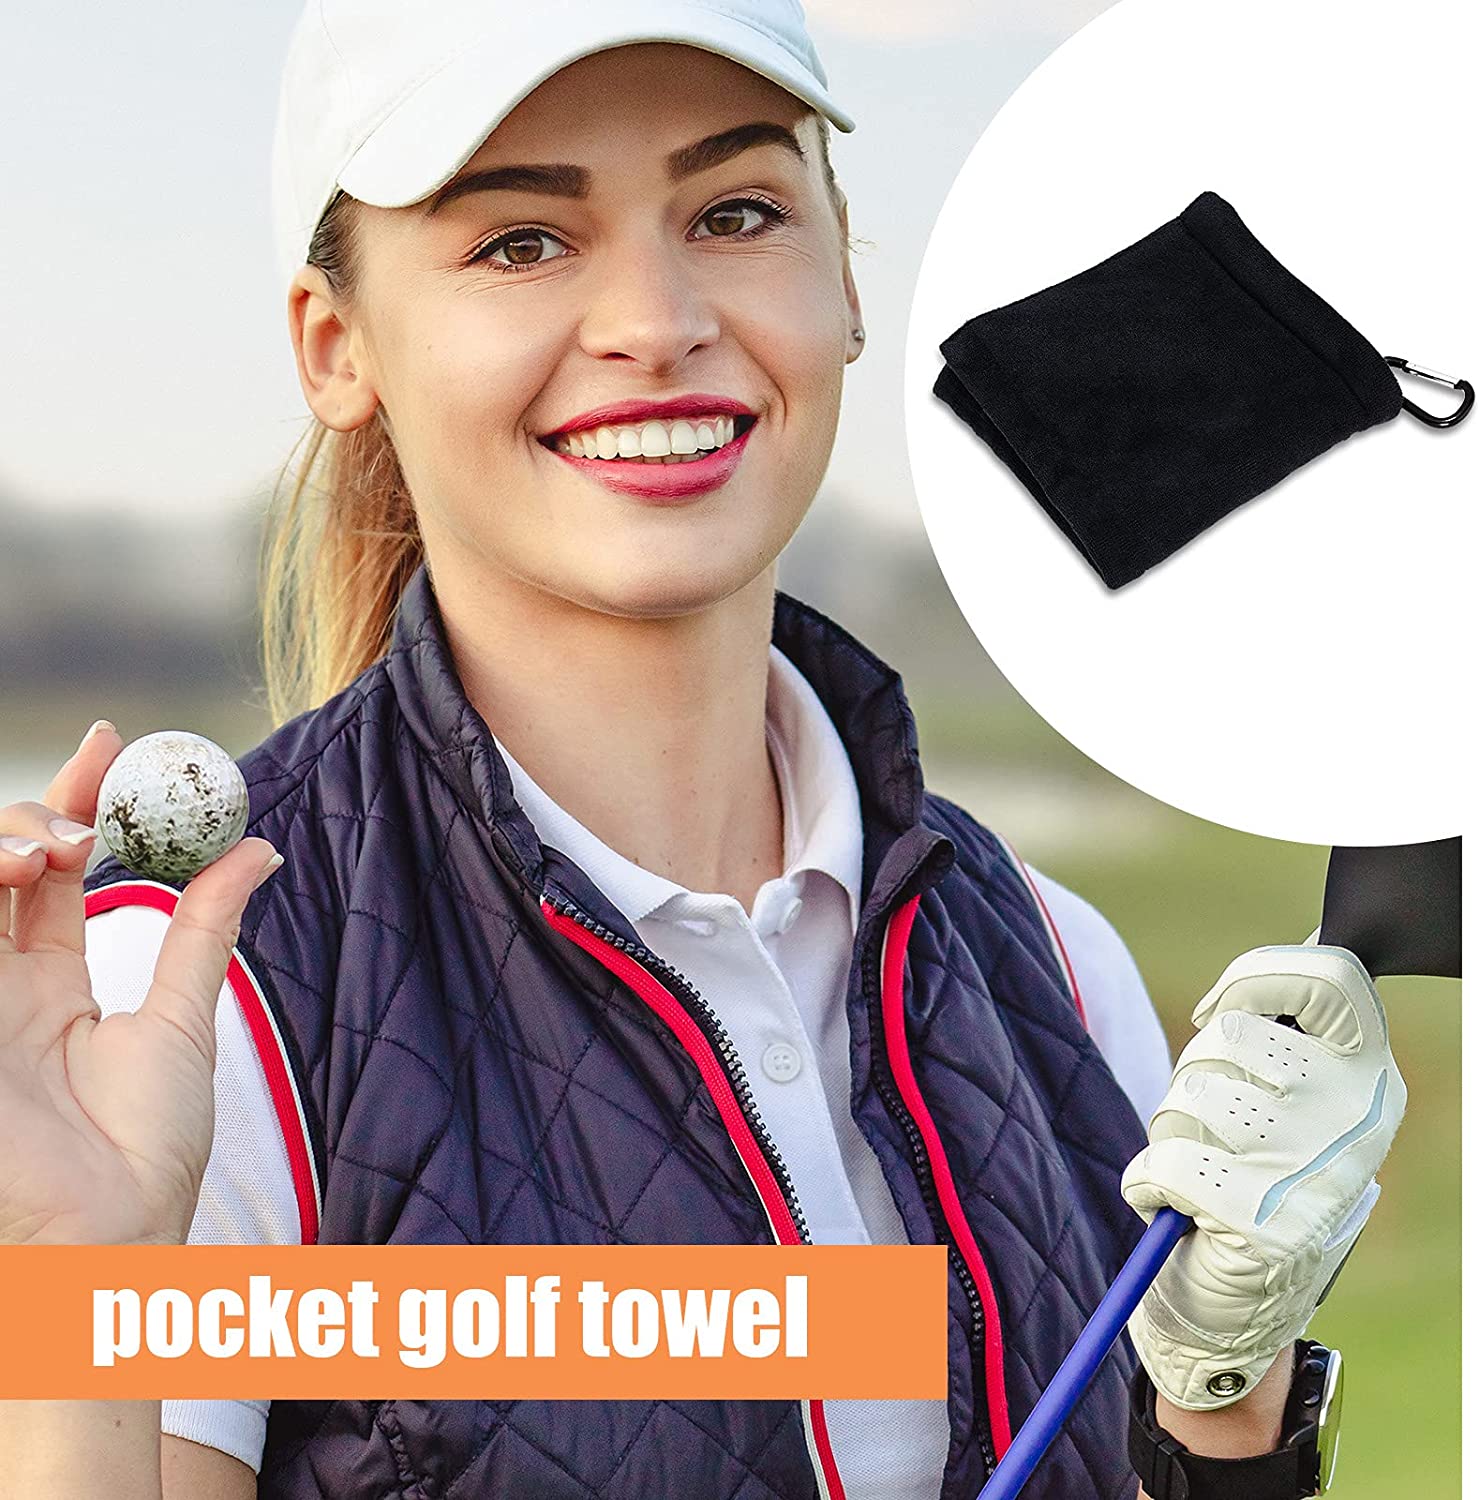 Golf Ball Towel 5.5 x 5.5 Inch Black Golf Wet and Dry Golf Towel Pocket Golf Towel with Clip Ball Towel Golf Ball Towel for Golf Course Exercise Towel (3 Pieces) - image 4 of 7